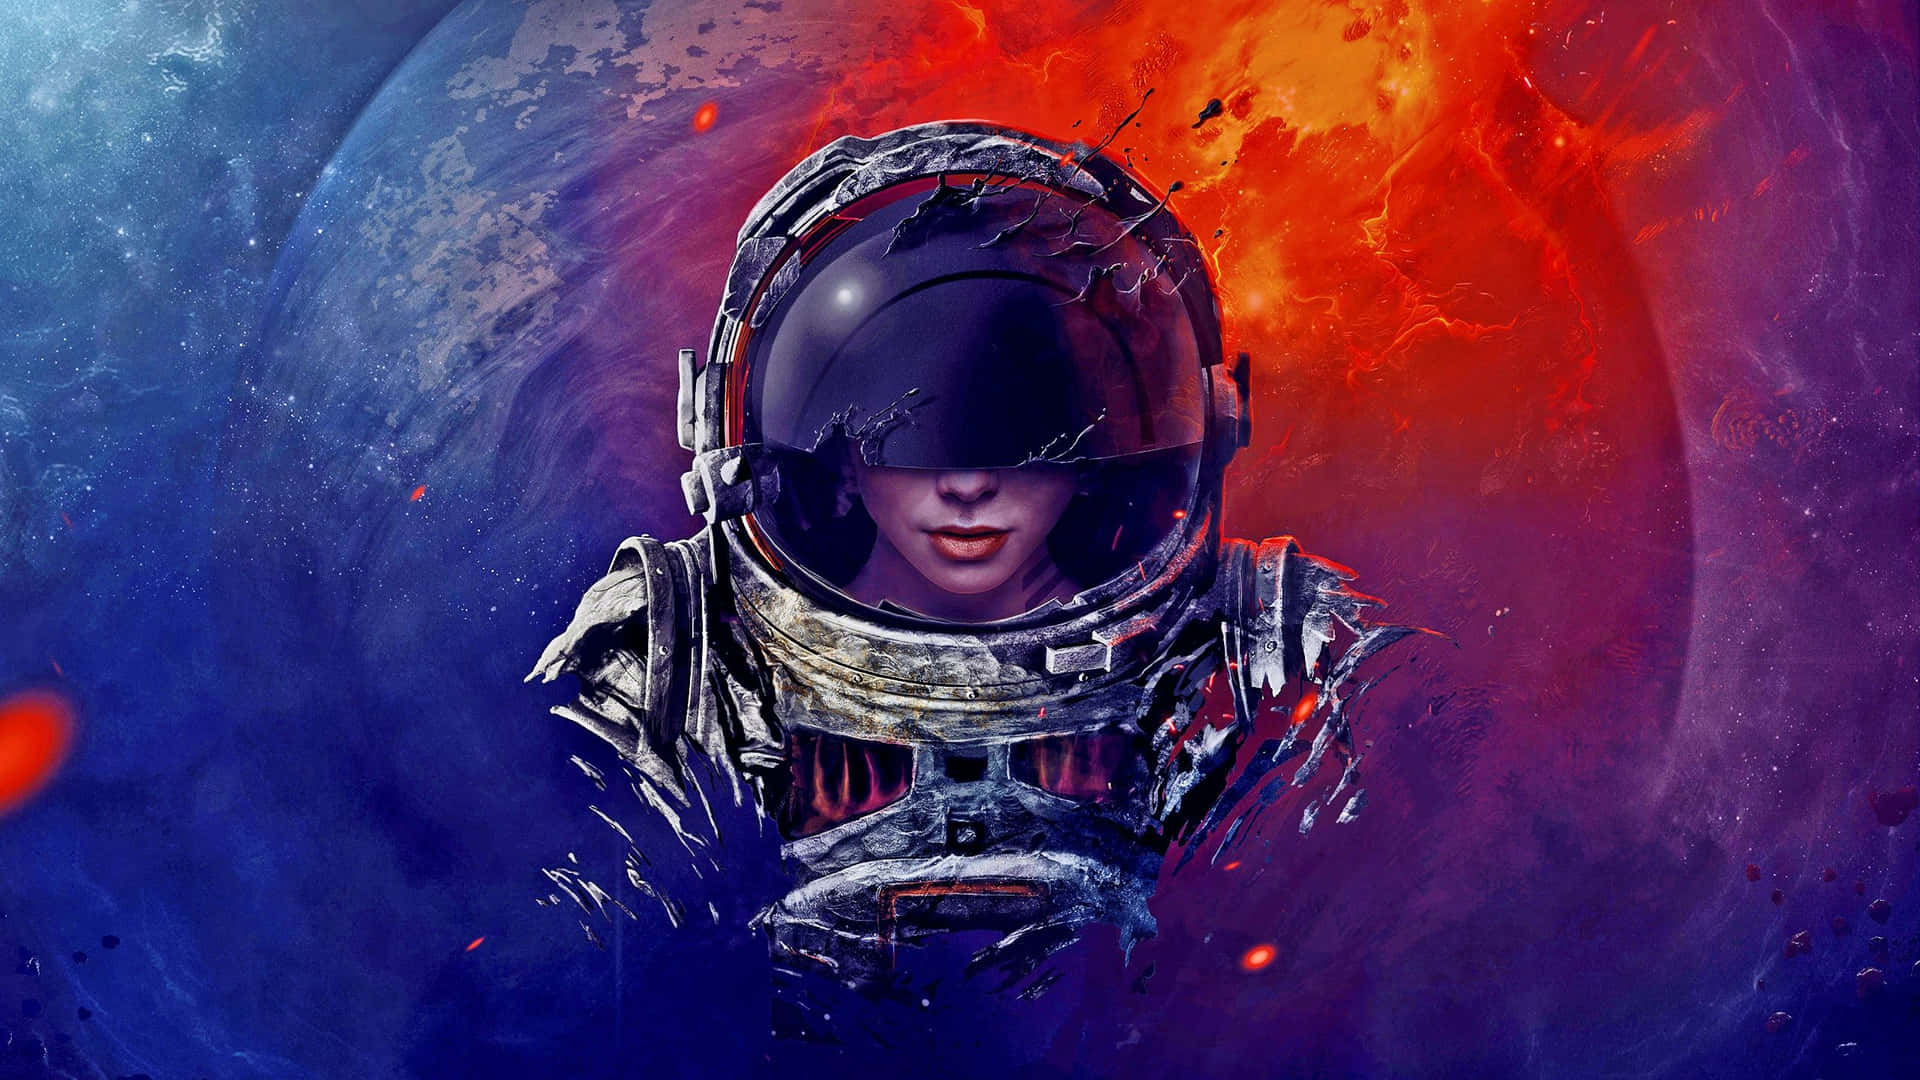 "A trippy subject - an astronaut discovering the unknown in outer space" Wallpaper